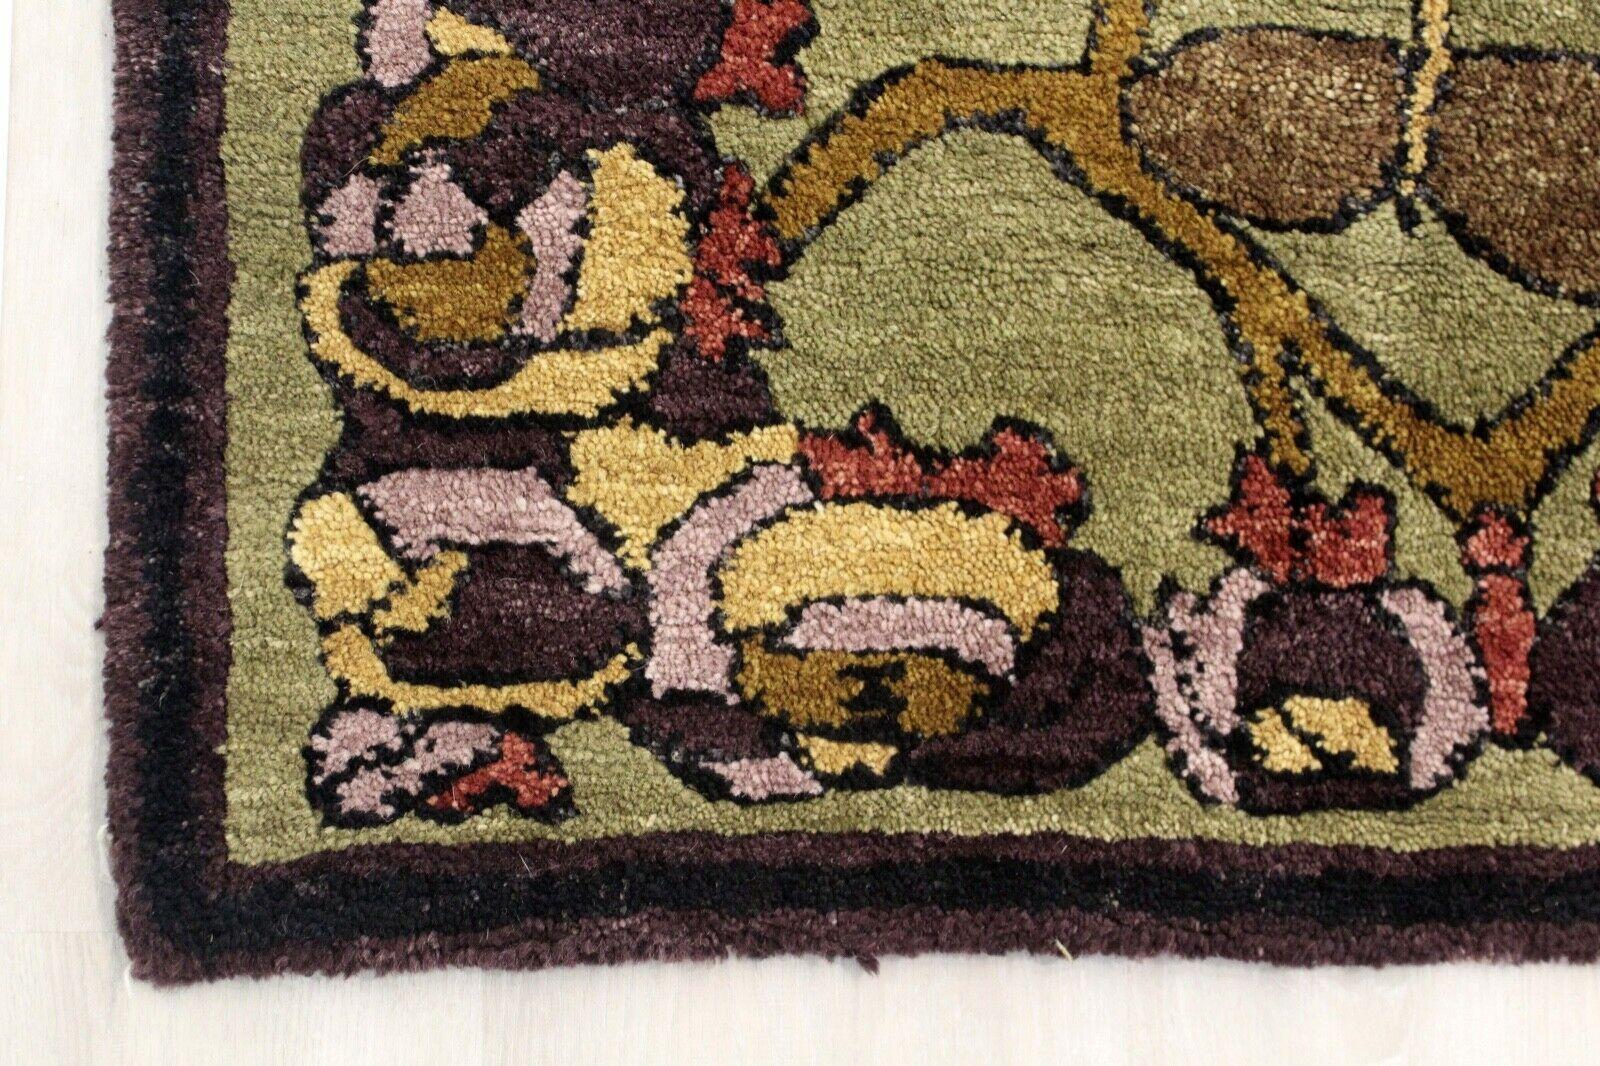 This Arts & Crafts style area rug combines traditional colors and flower rosettes ranging in reds, greens and browns. Simply stunning, this rug is 100% hand spun in Nepal by Tufenkian Luxury Rugs.

Dimensions: 8' x 10'.